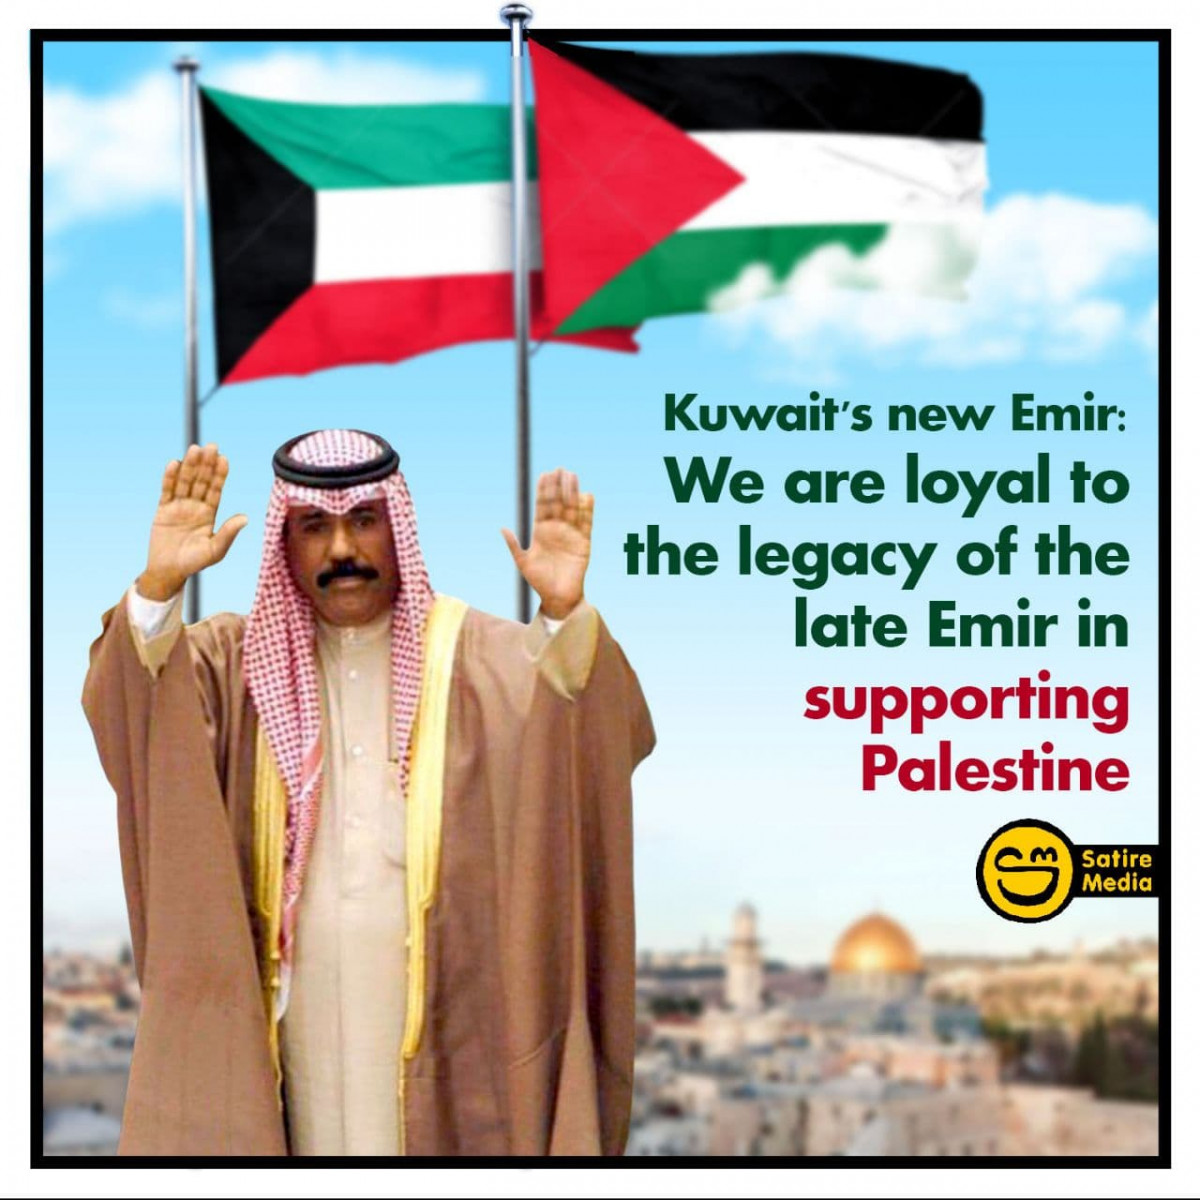 Kuwait's new Emir: We are loyal to the legacy of the late Emir in supporting Palestine